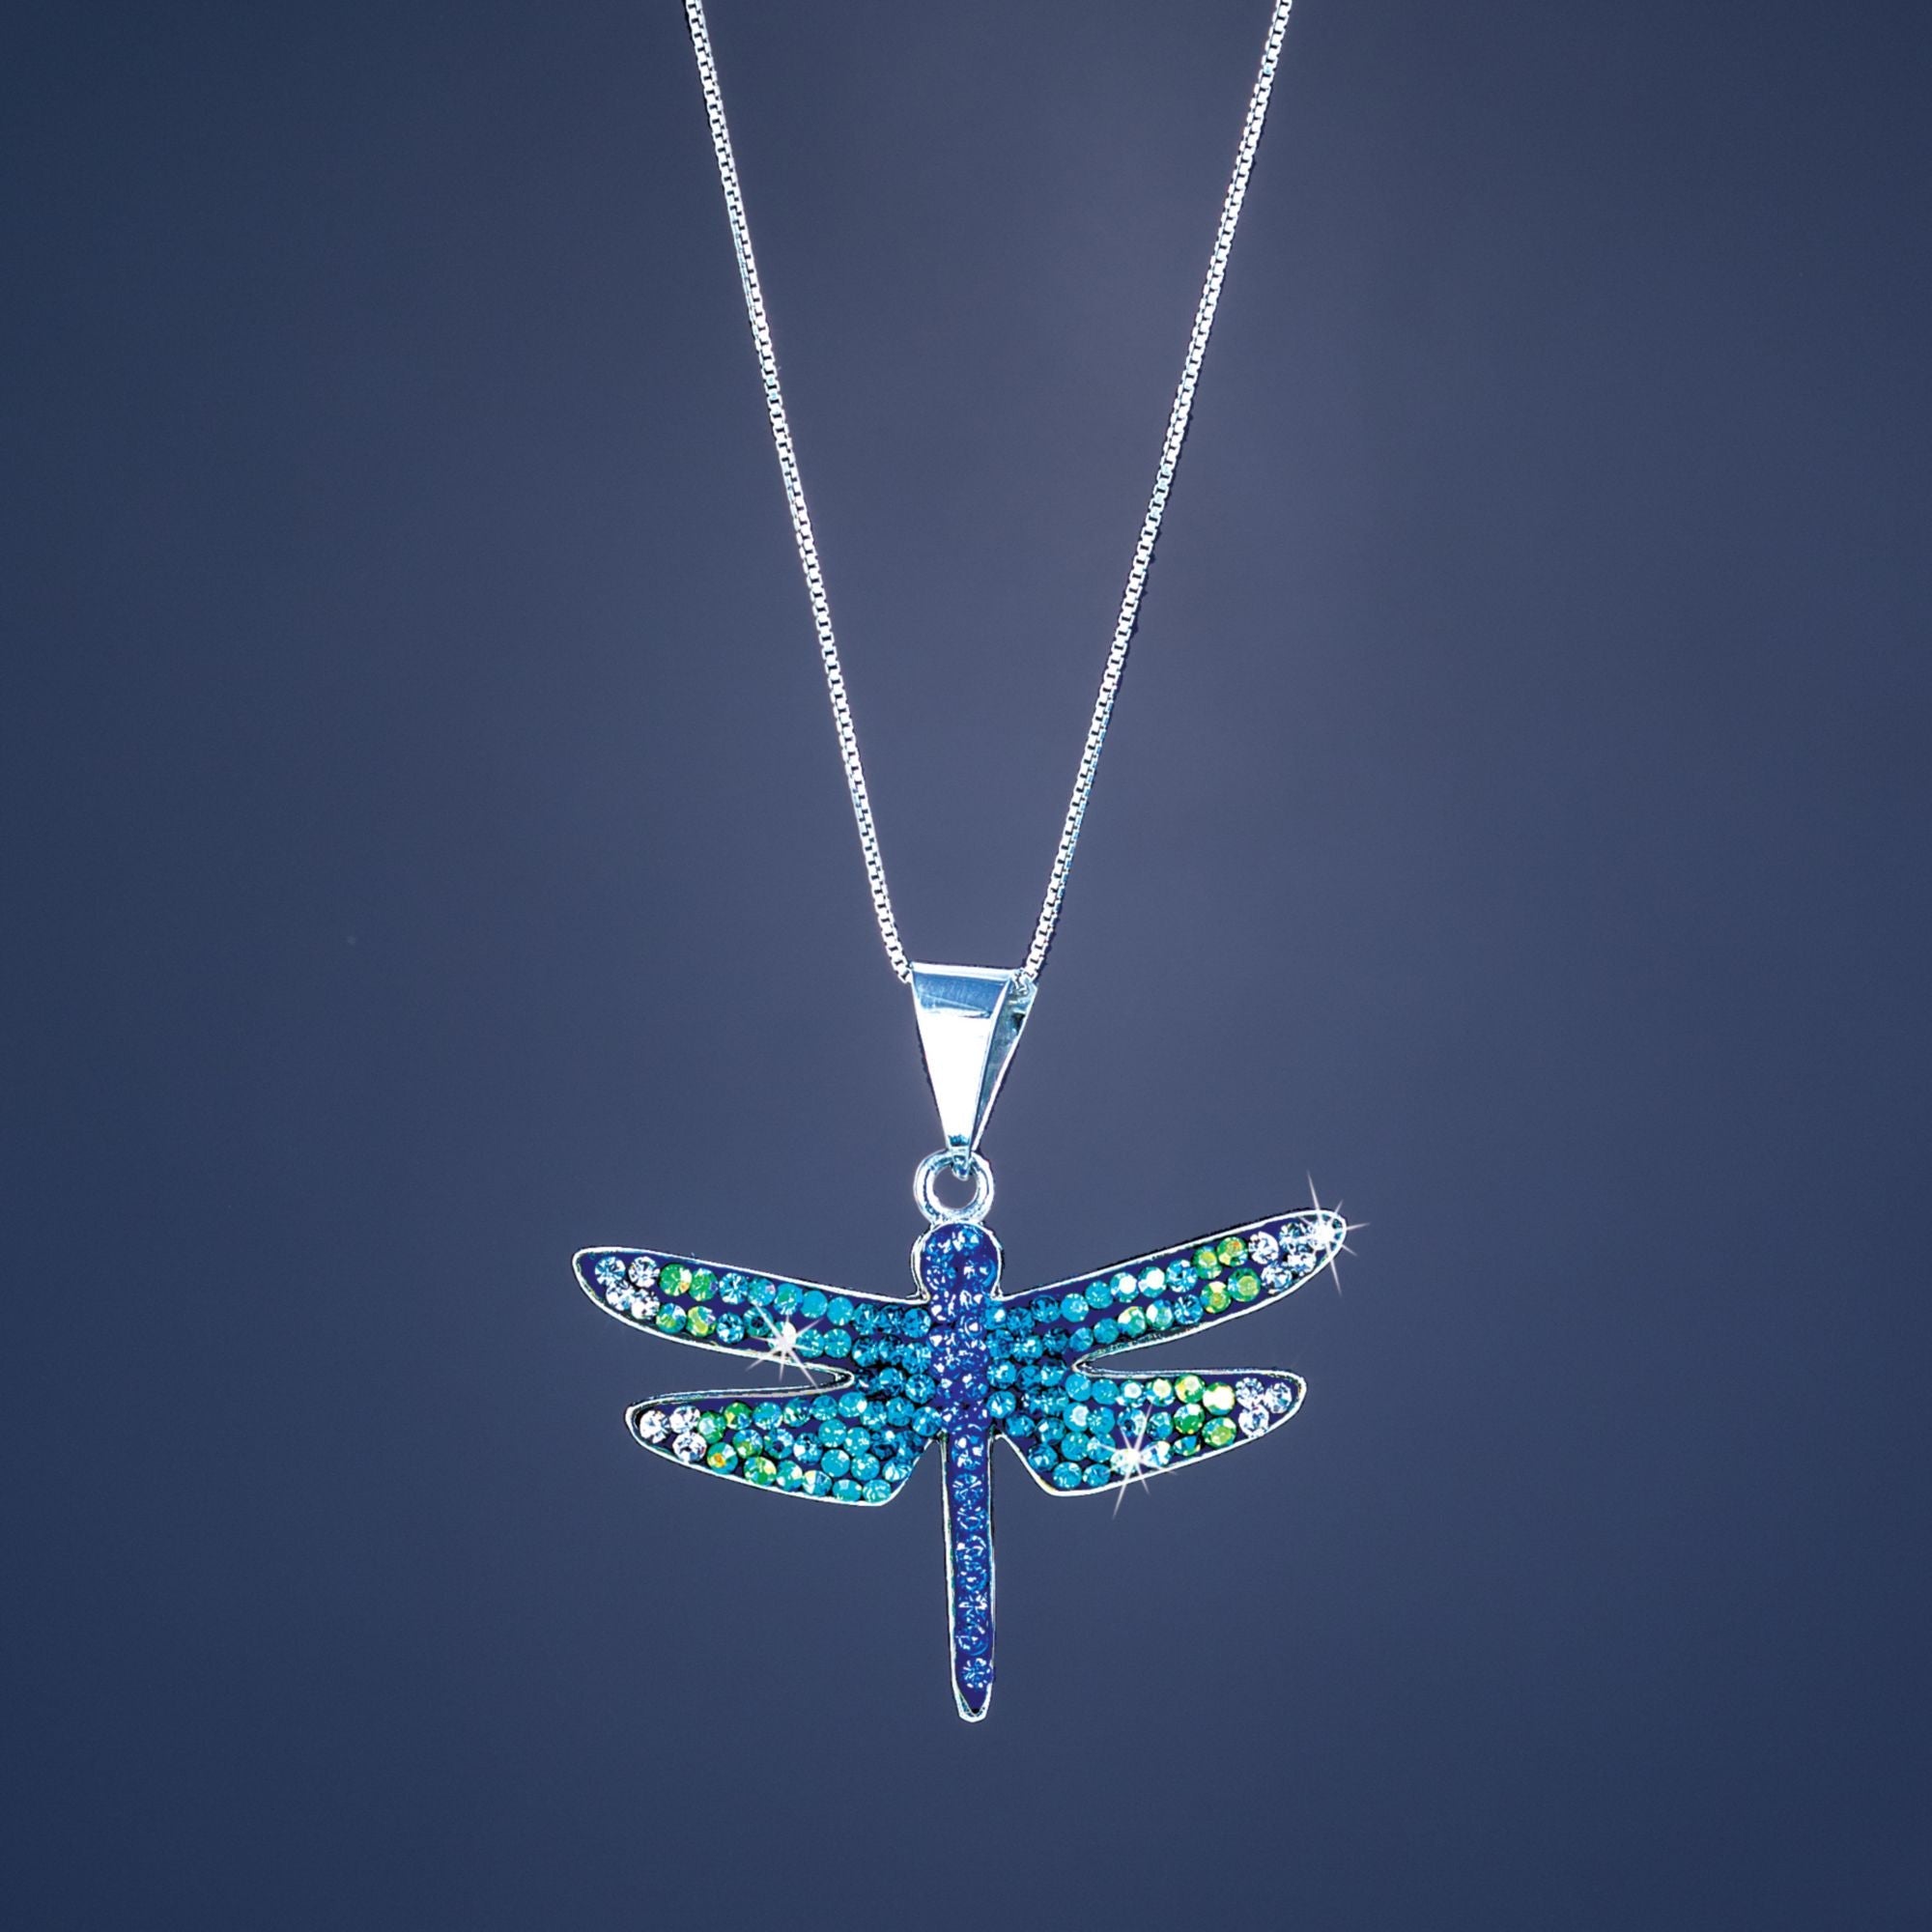 Mexican Mosaic Dragonfly Pendant Necklace